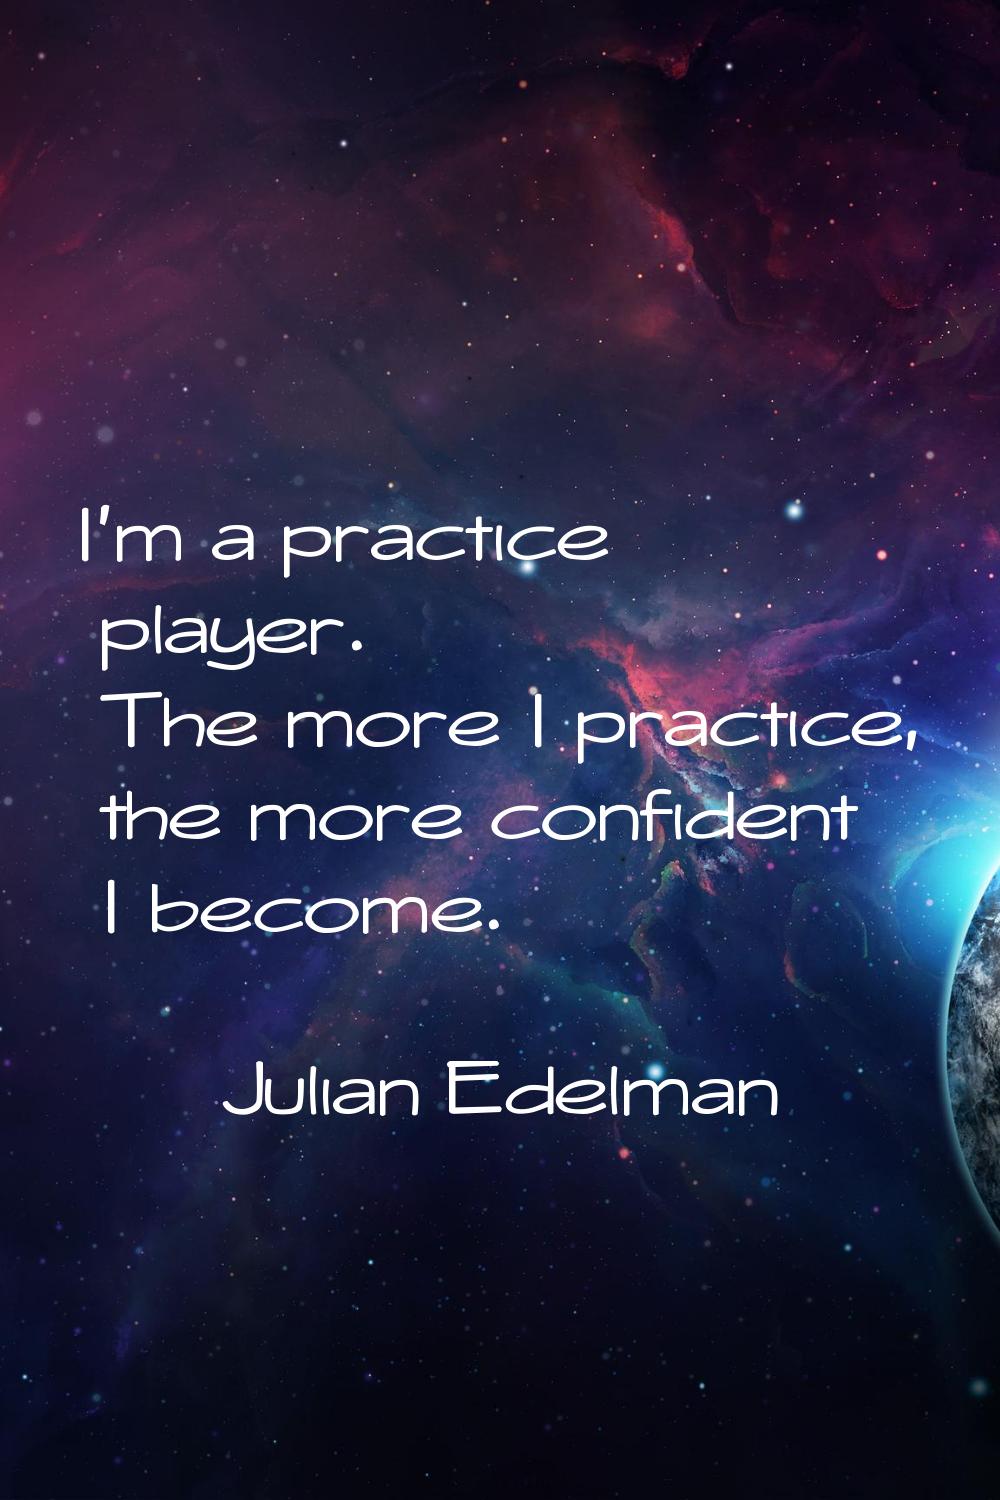 I'm a practice player. The more I practice, the more confident I become.